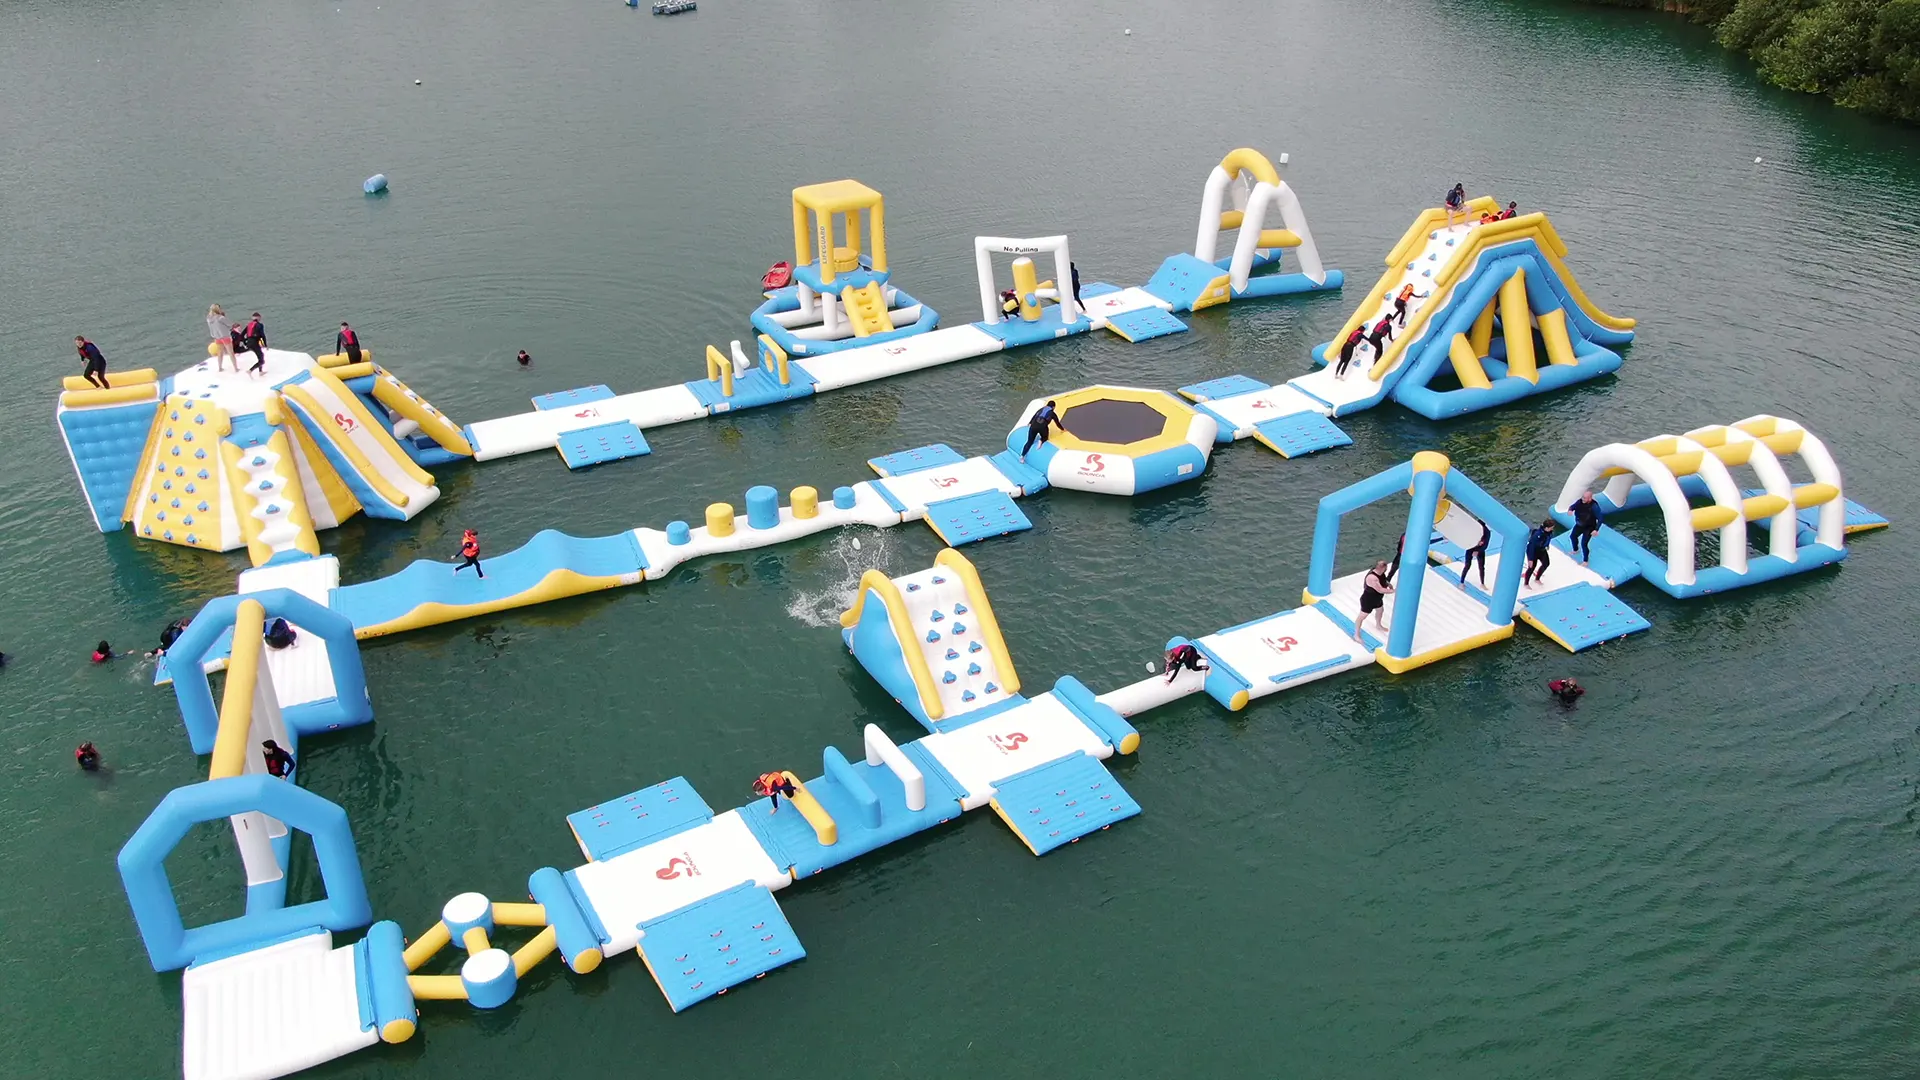 Aerial view of people enjoying the inflatables at Fenland Aquapark